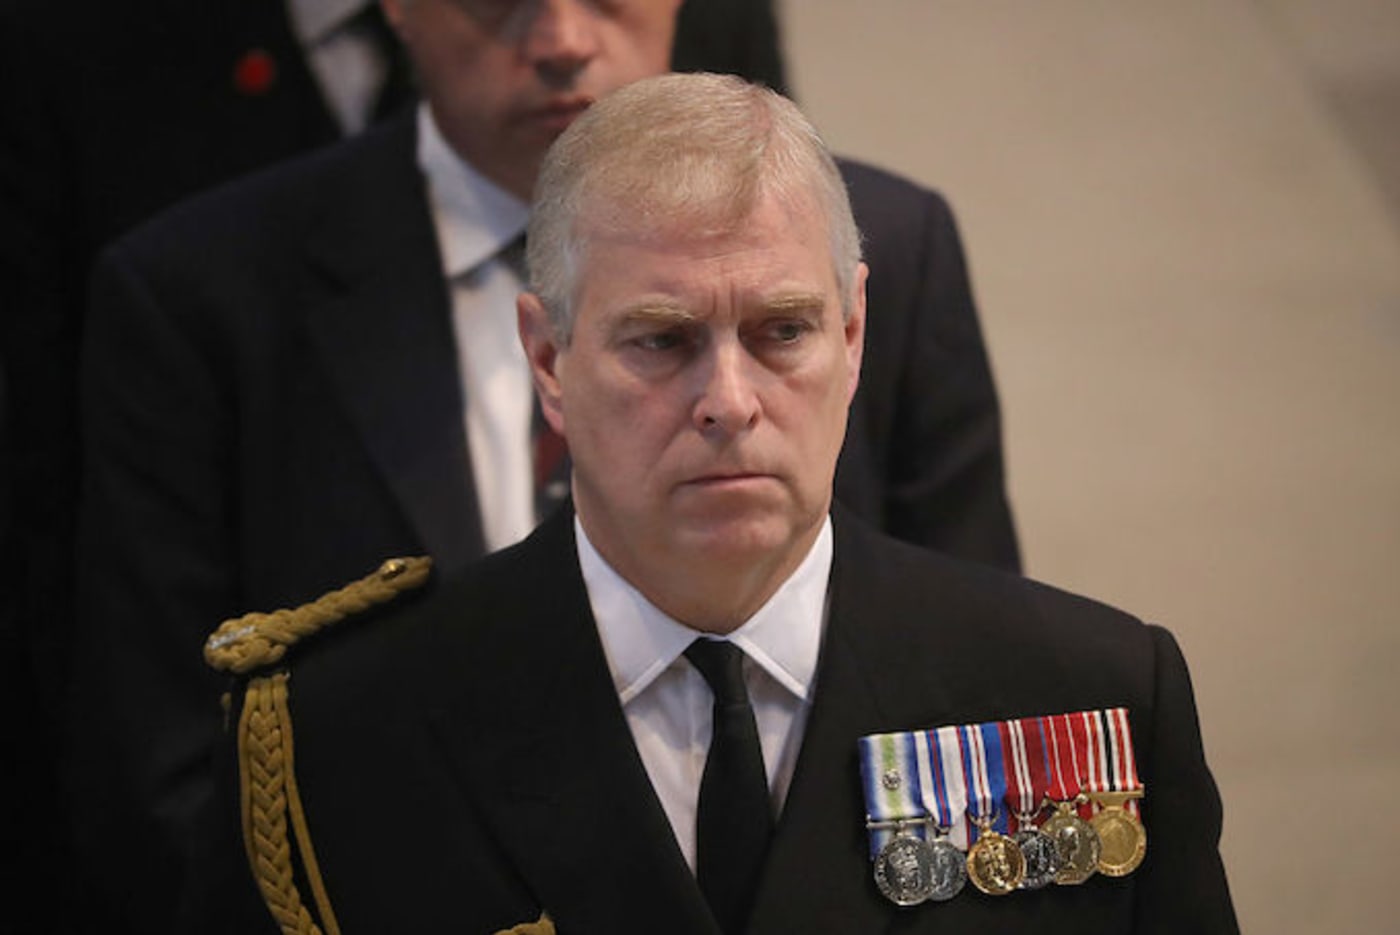 This is a picture of Prince Andrew.